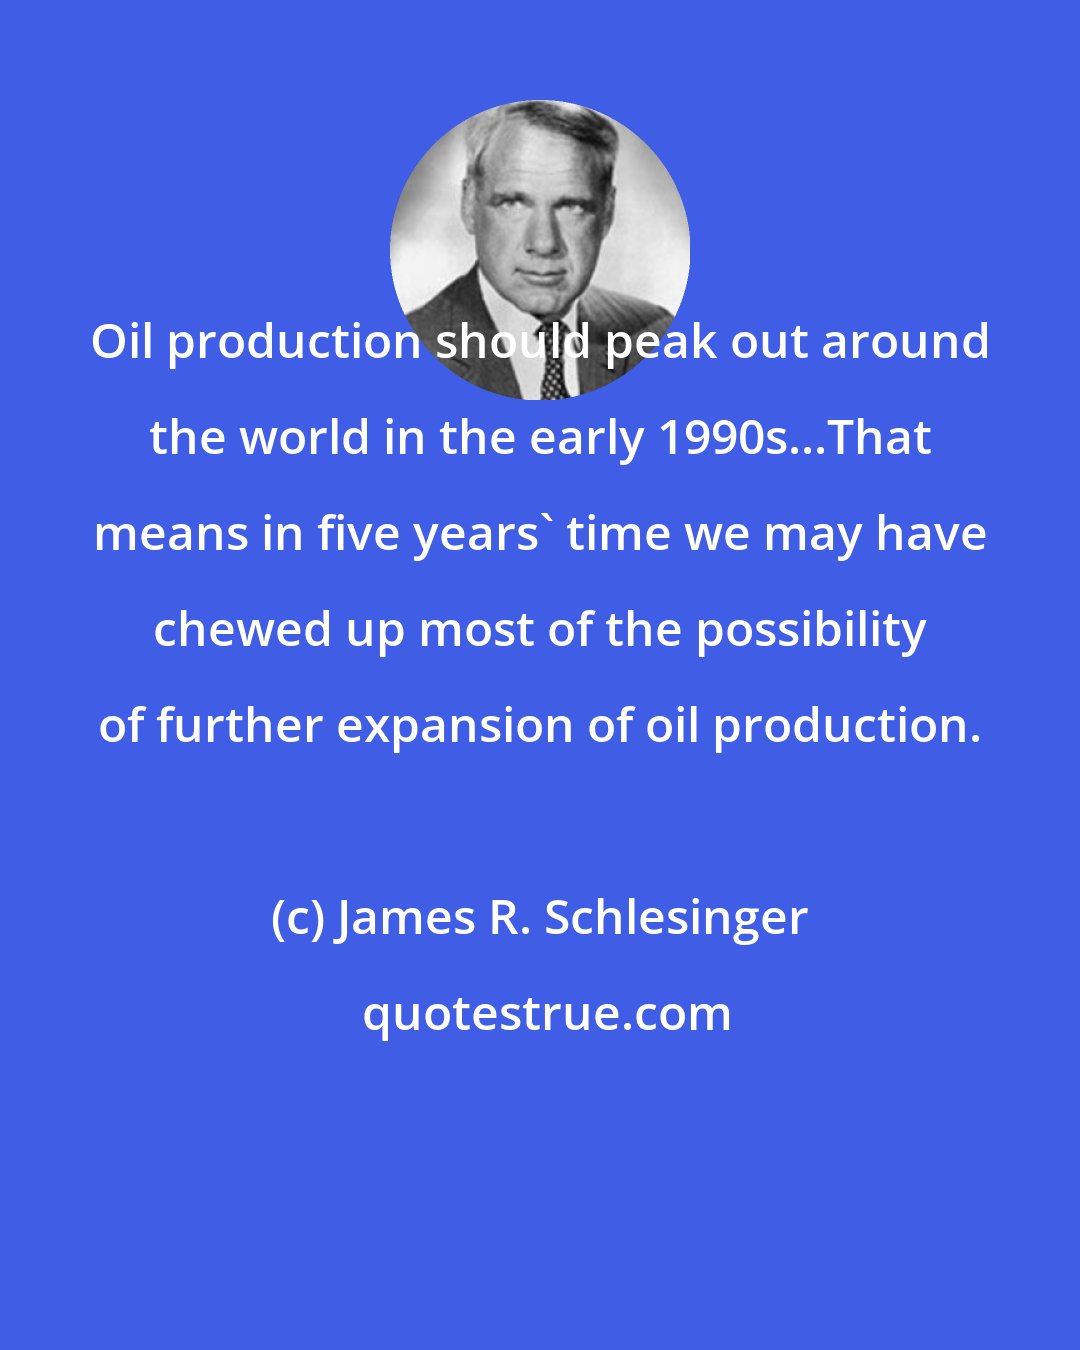 James R. Schlesinger: Oil production should peak out around the world in the early 1990s...That means in five years' time we may have chewed up most of the possibility of further expansion of oil production.